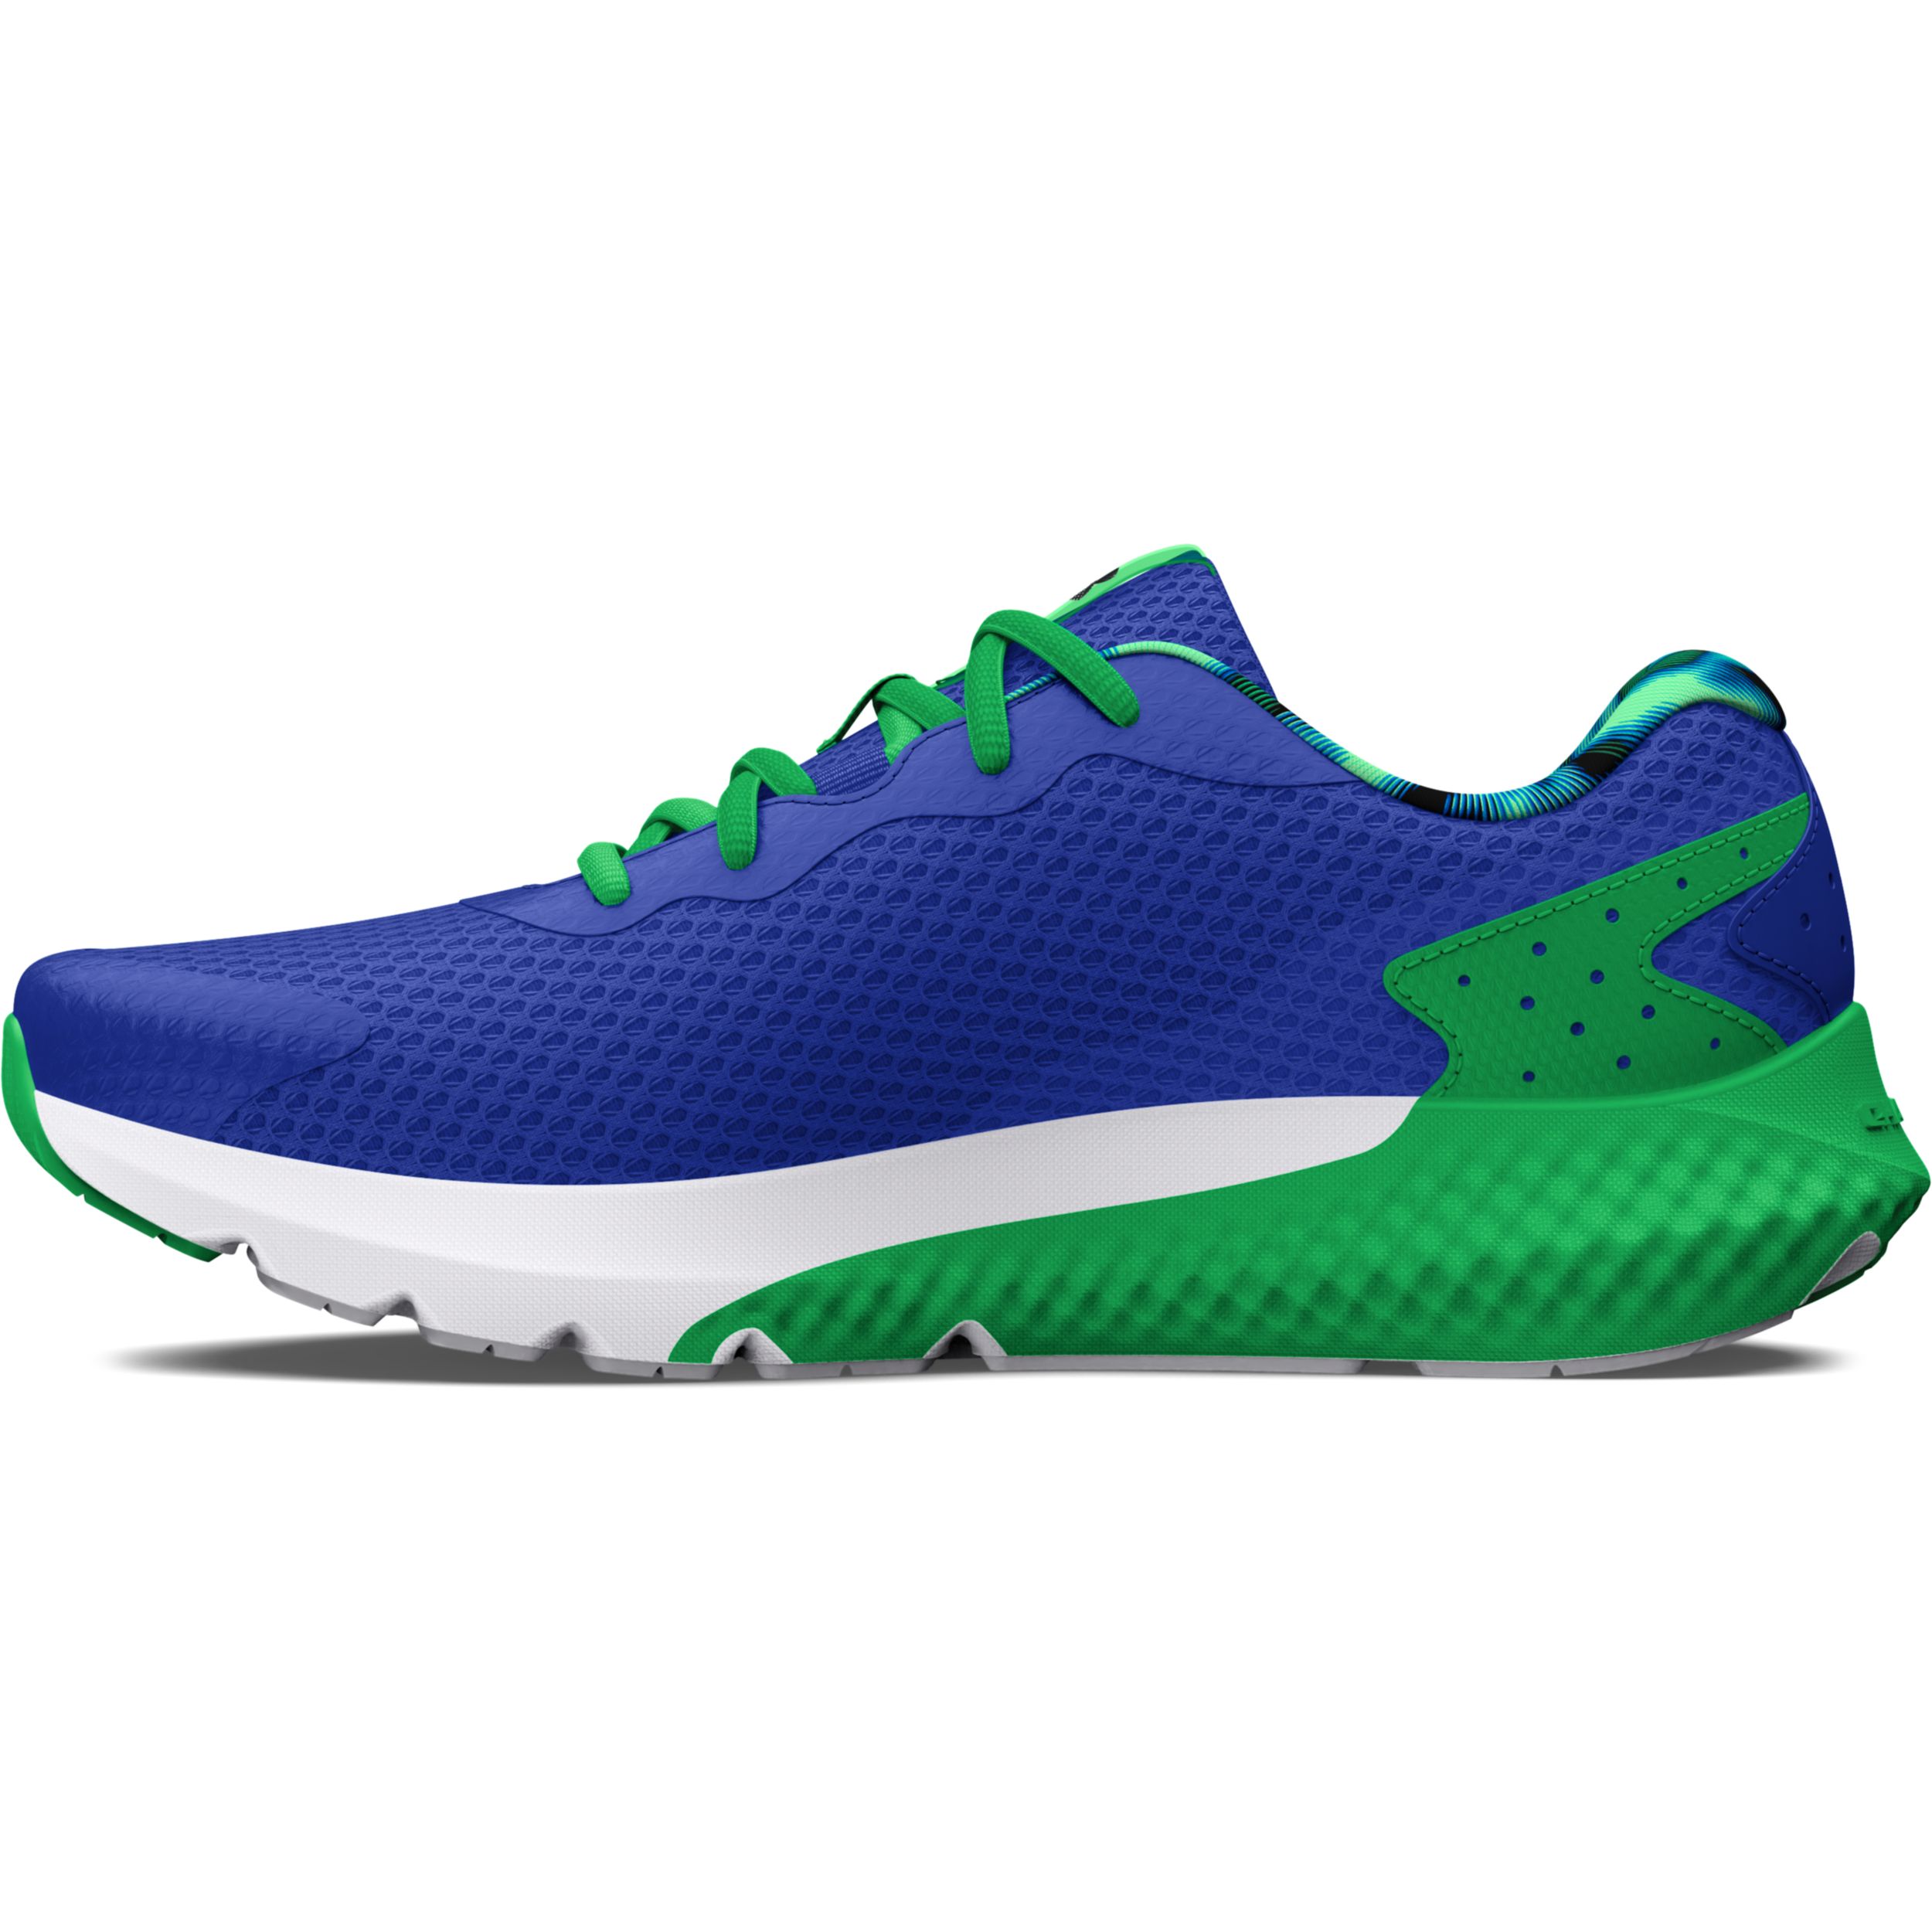 Under Armour UA GPS Infinity 3 Al Girl's Running Shoes